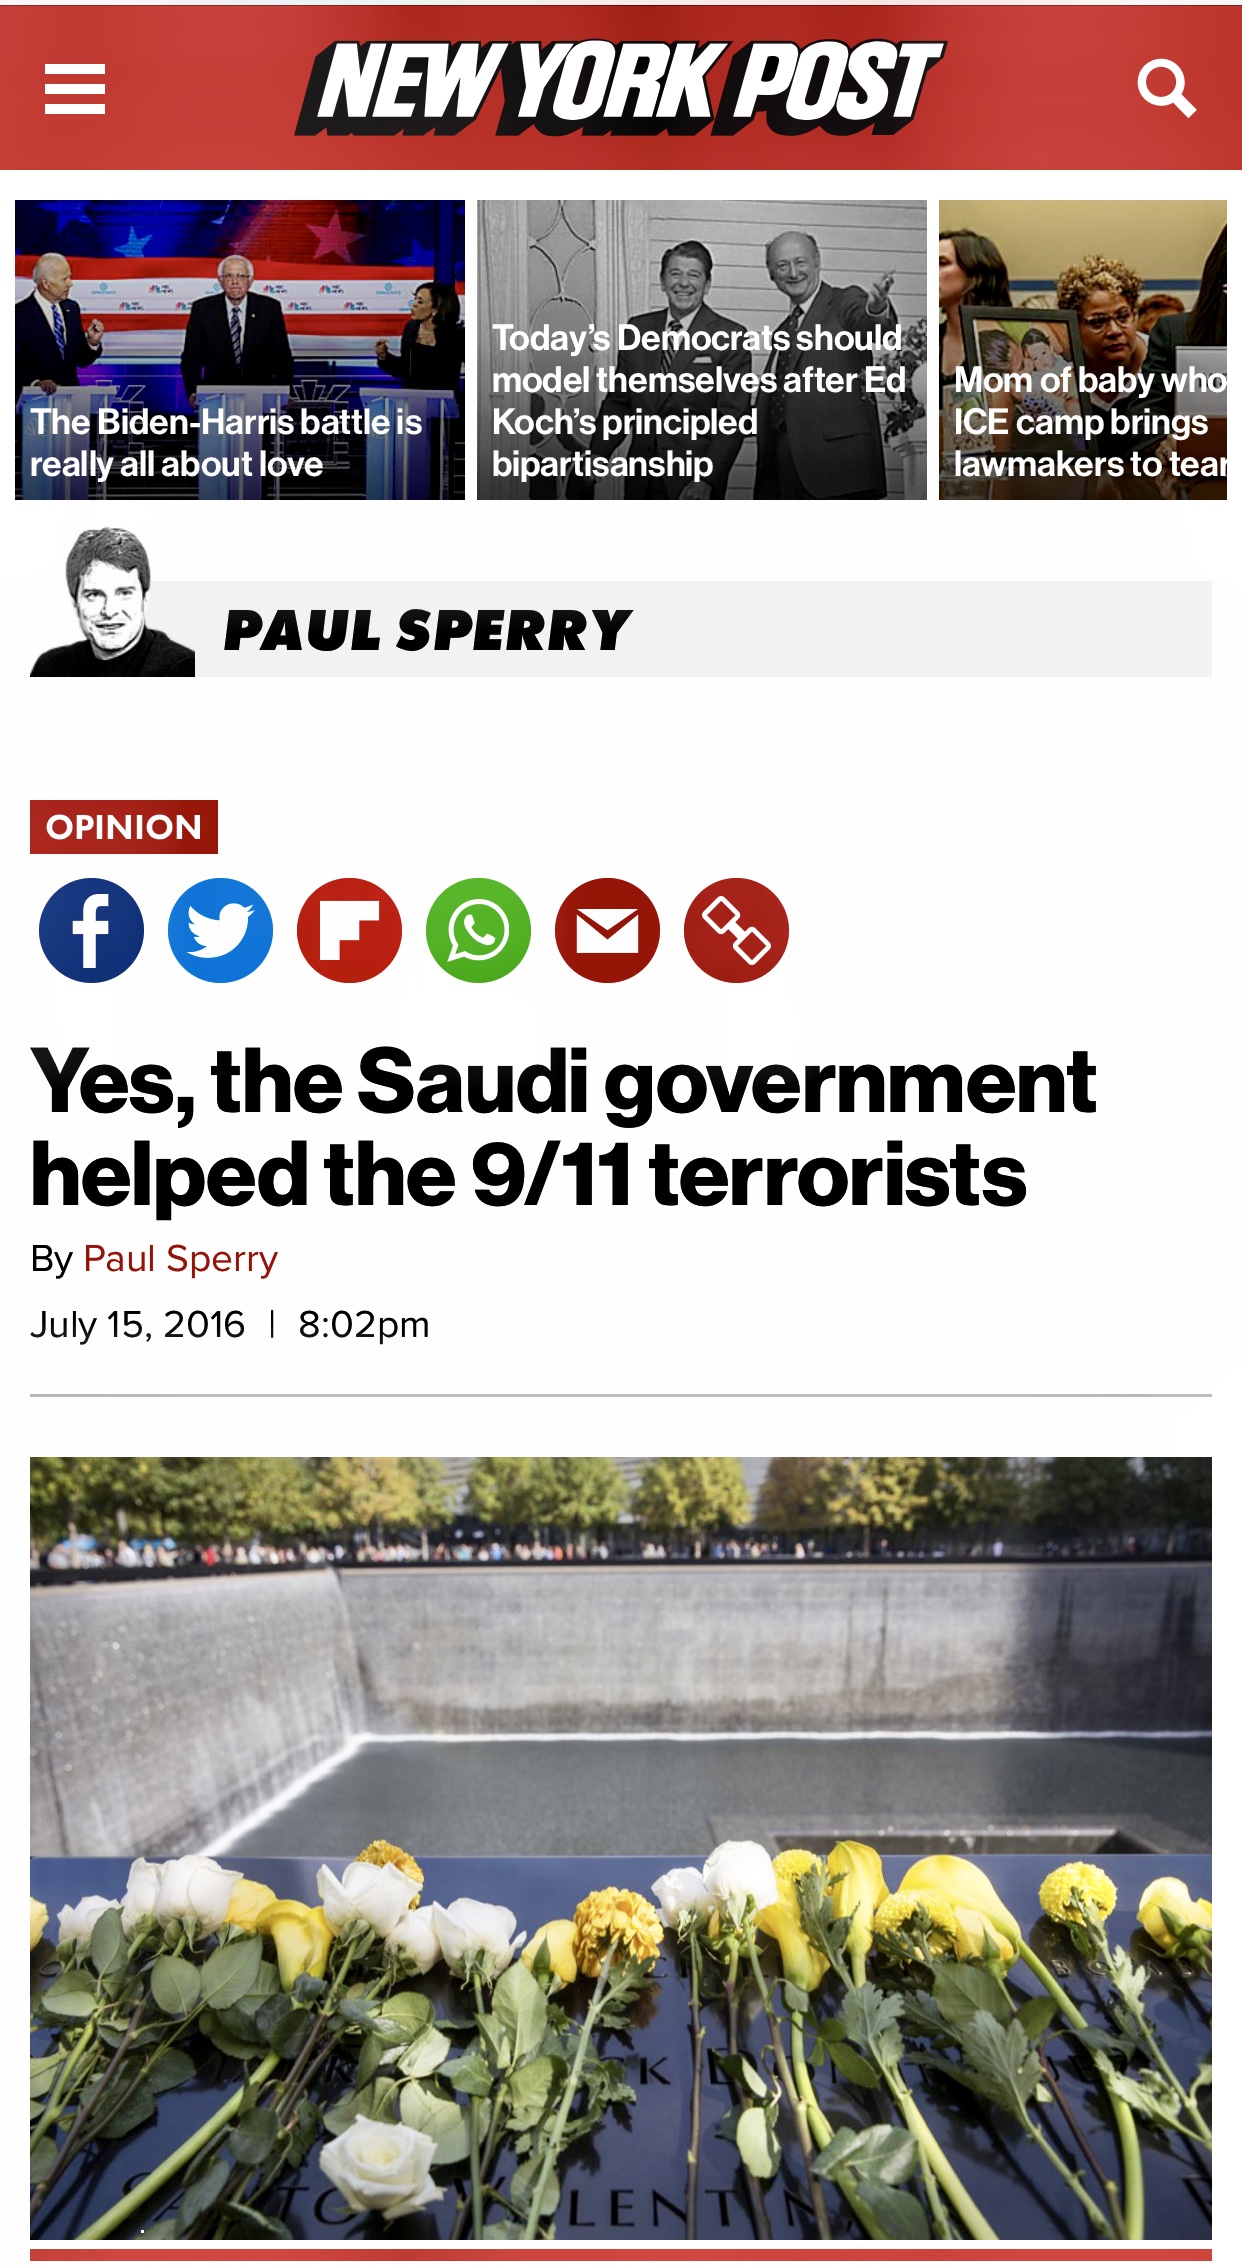 Yes, the Saudi government helped the 9/11 terrorists